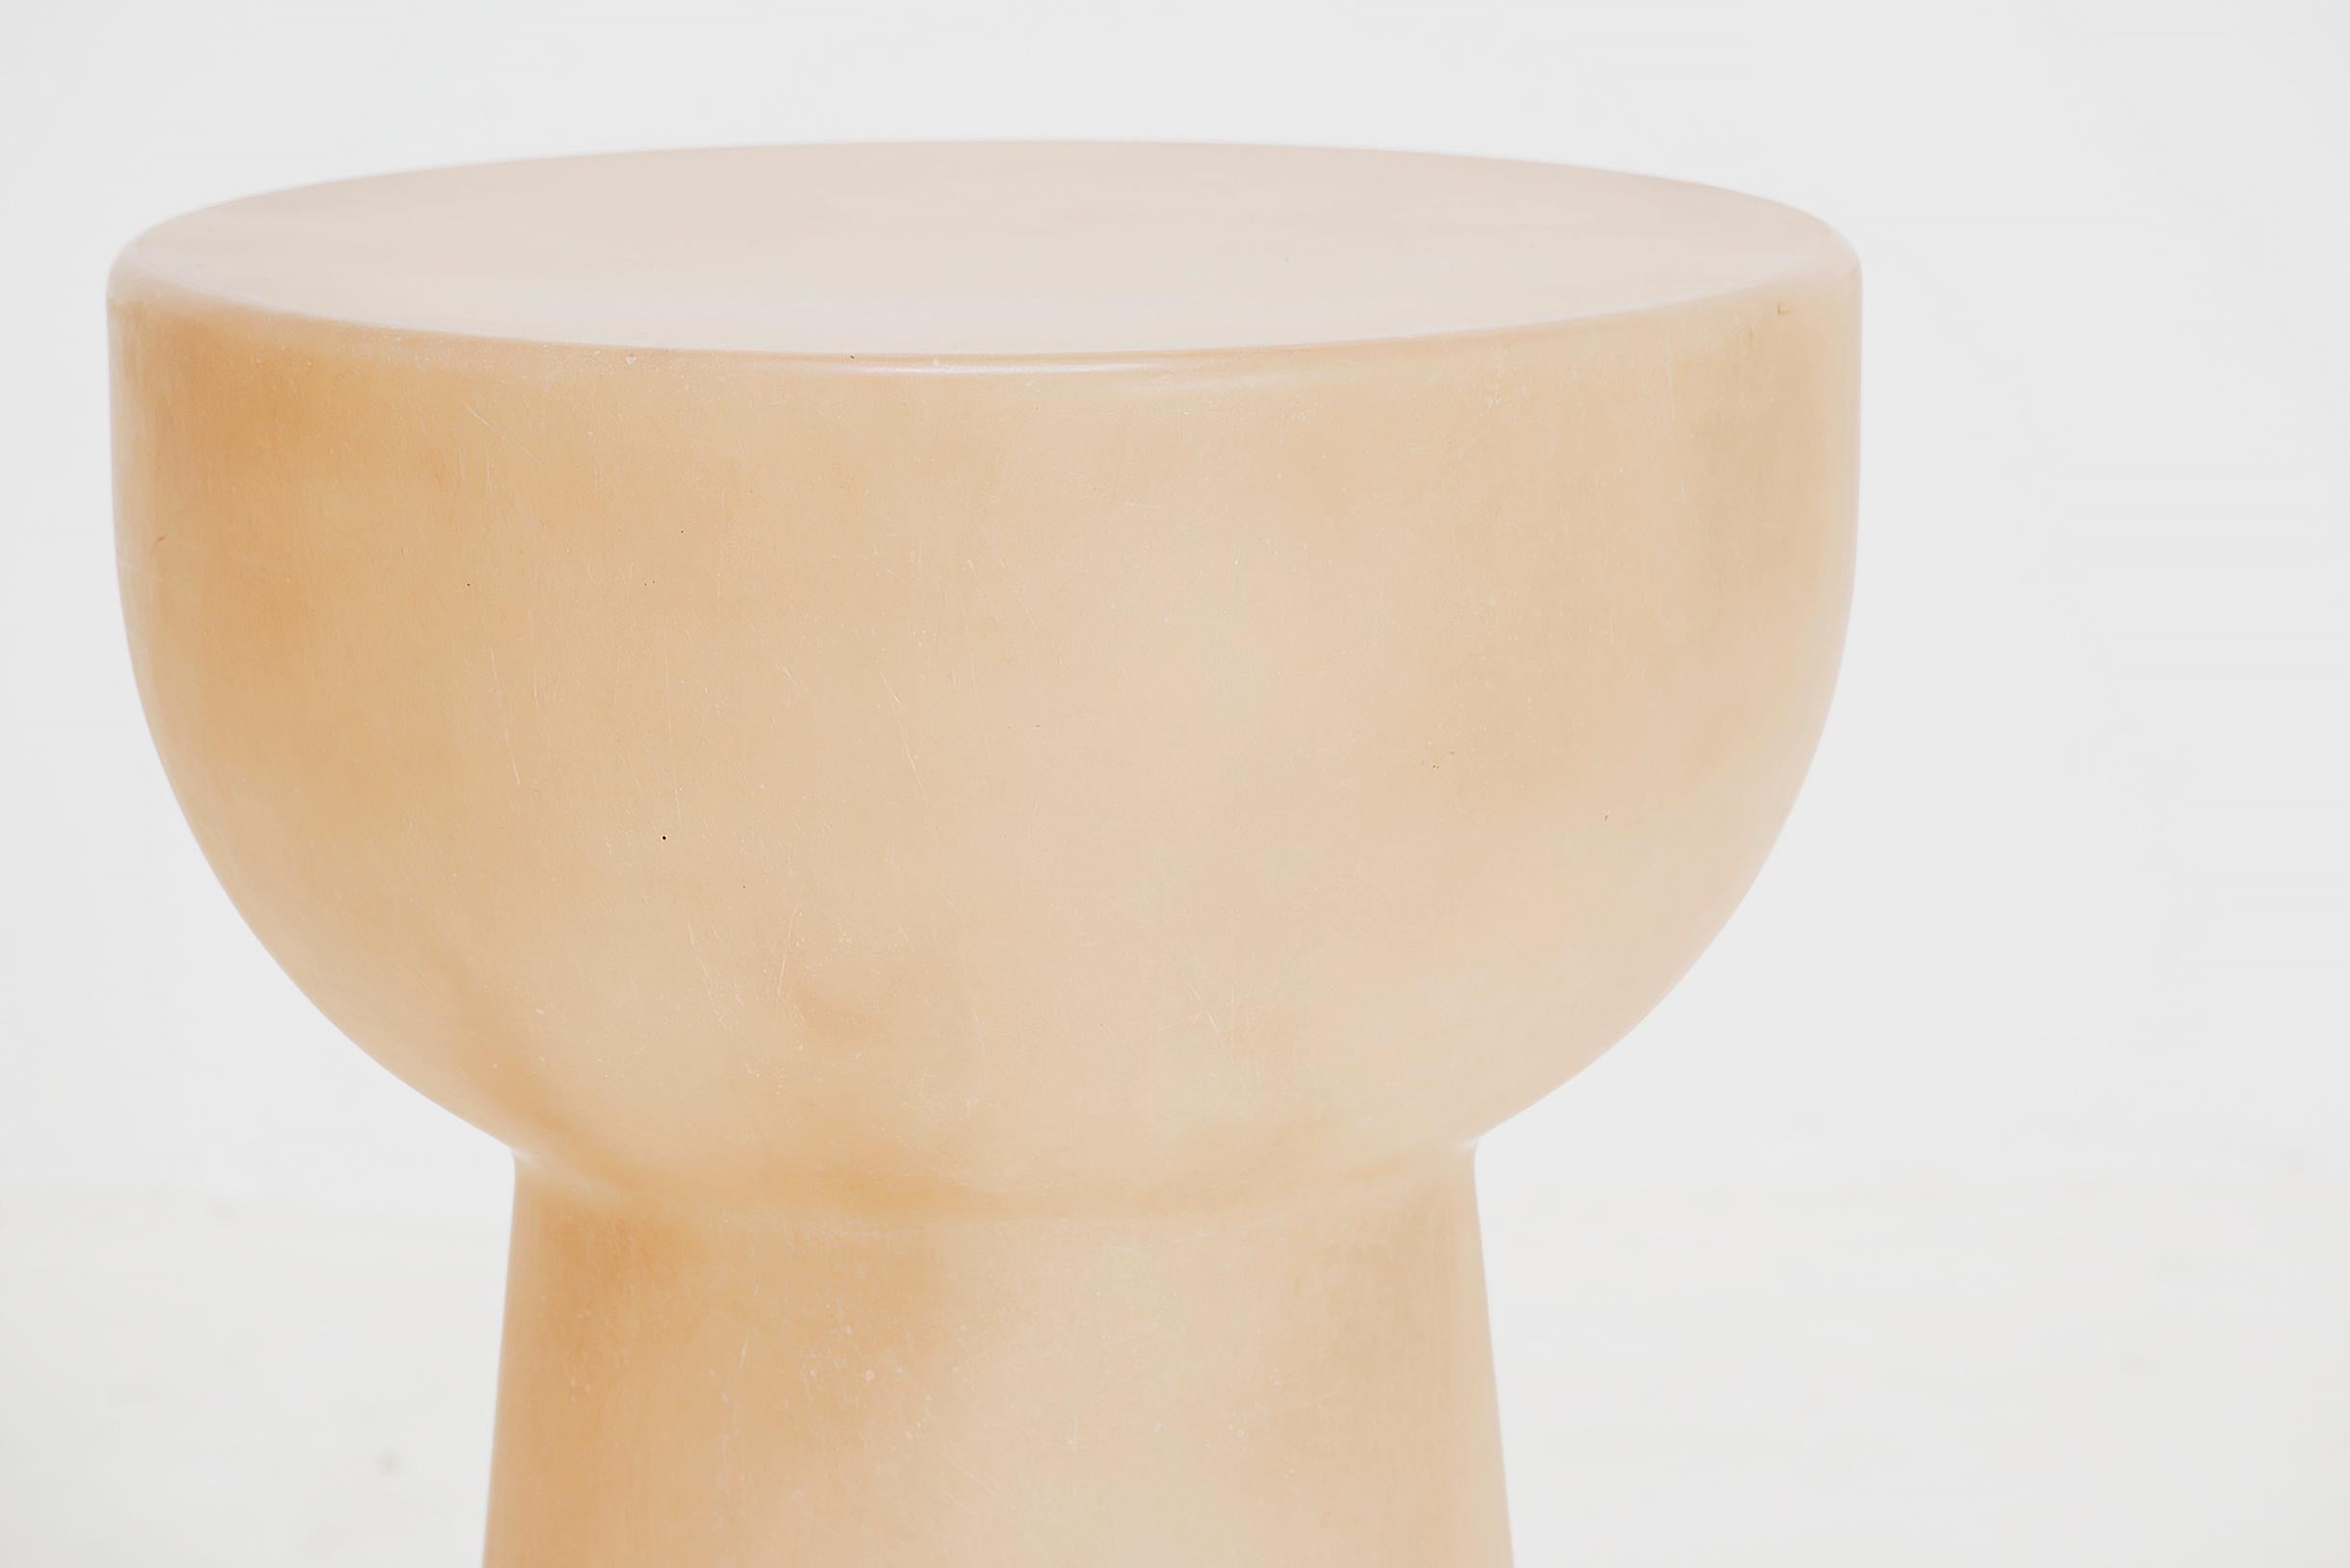 The Roly poly raw stool is made from a material that suggests a certain rawness. It embraces a world of soft lines and childlike rounded edges, an aesthetic that stands in direct contrast to the aggressive, post-industrial feel of her previous